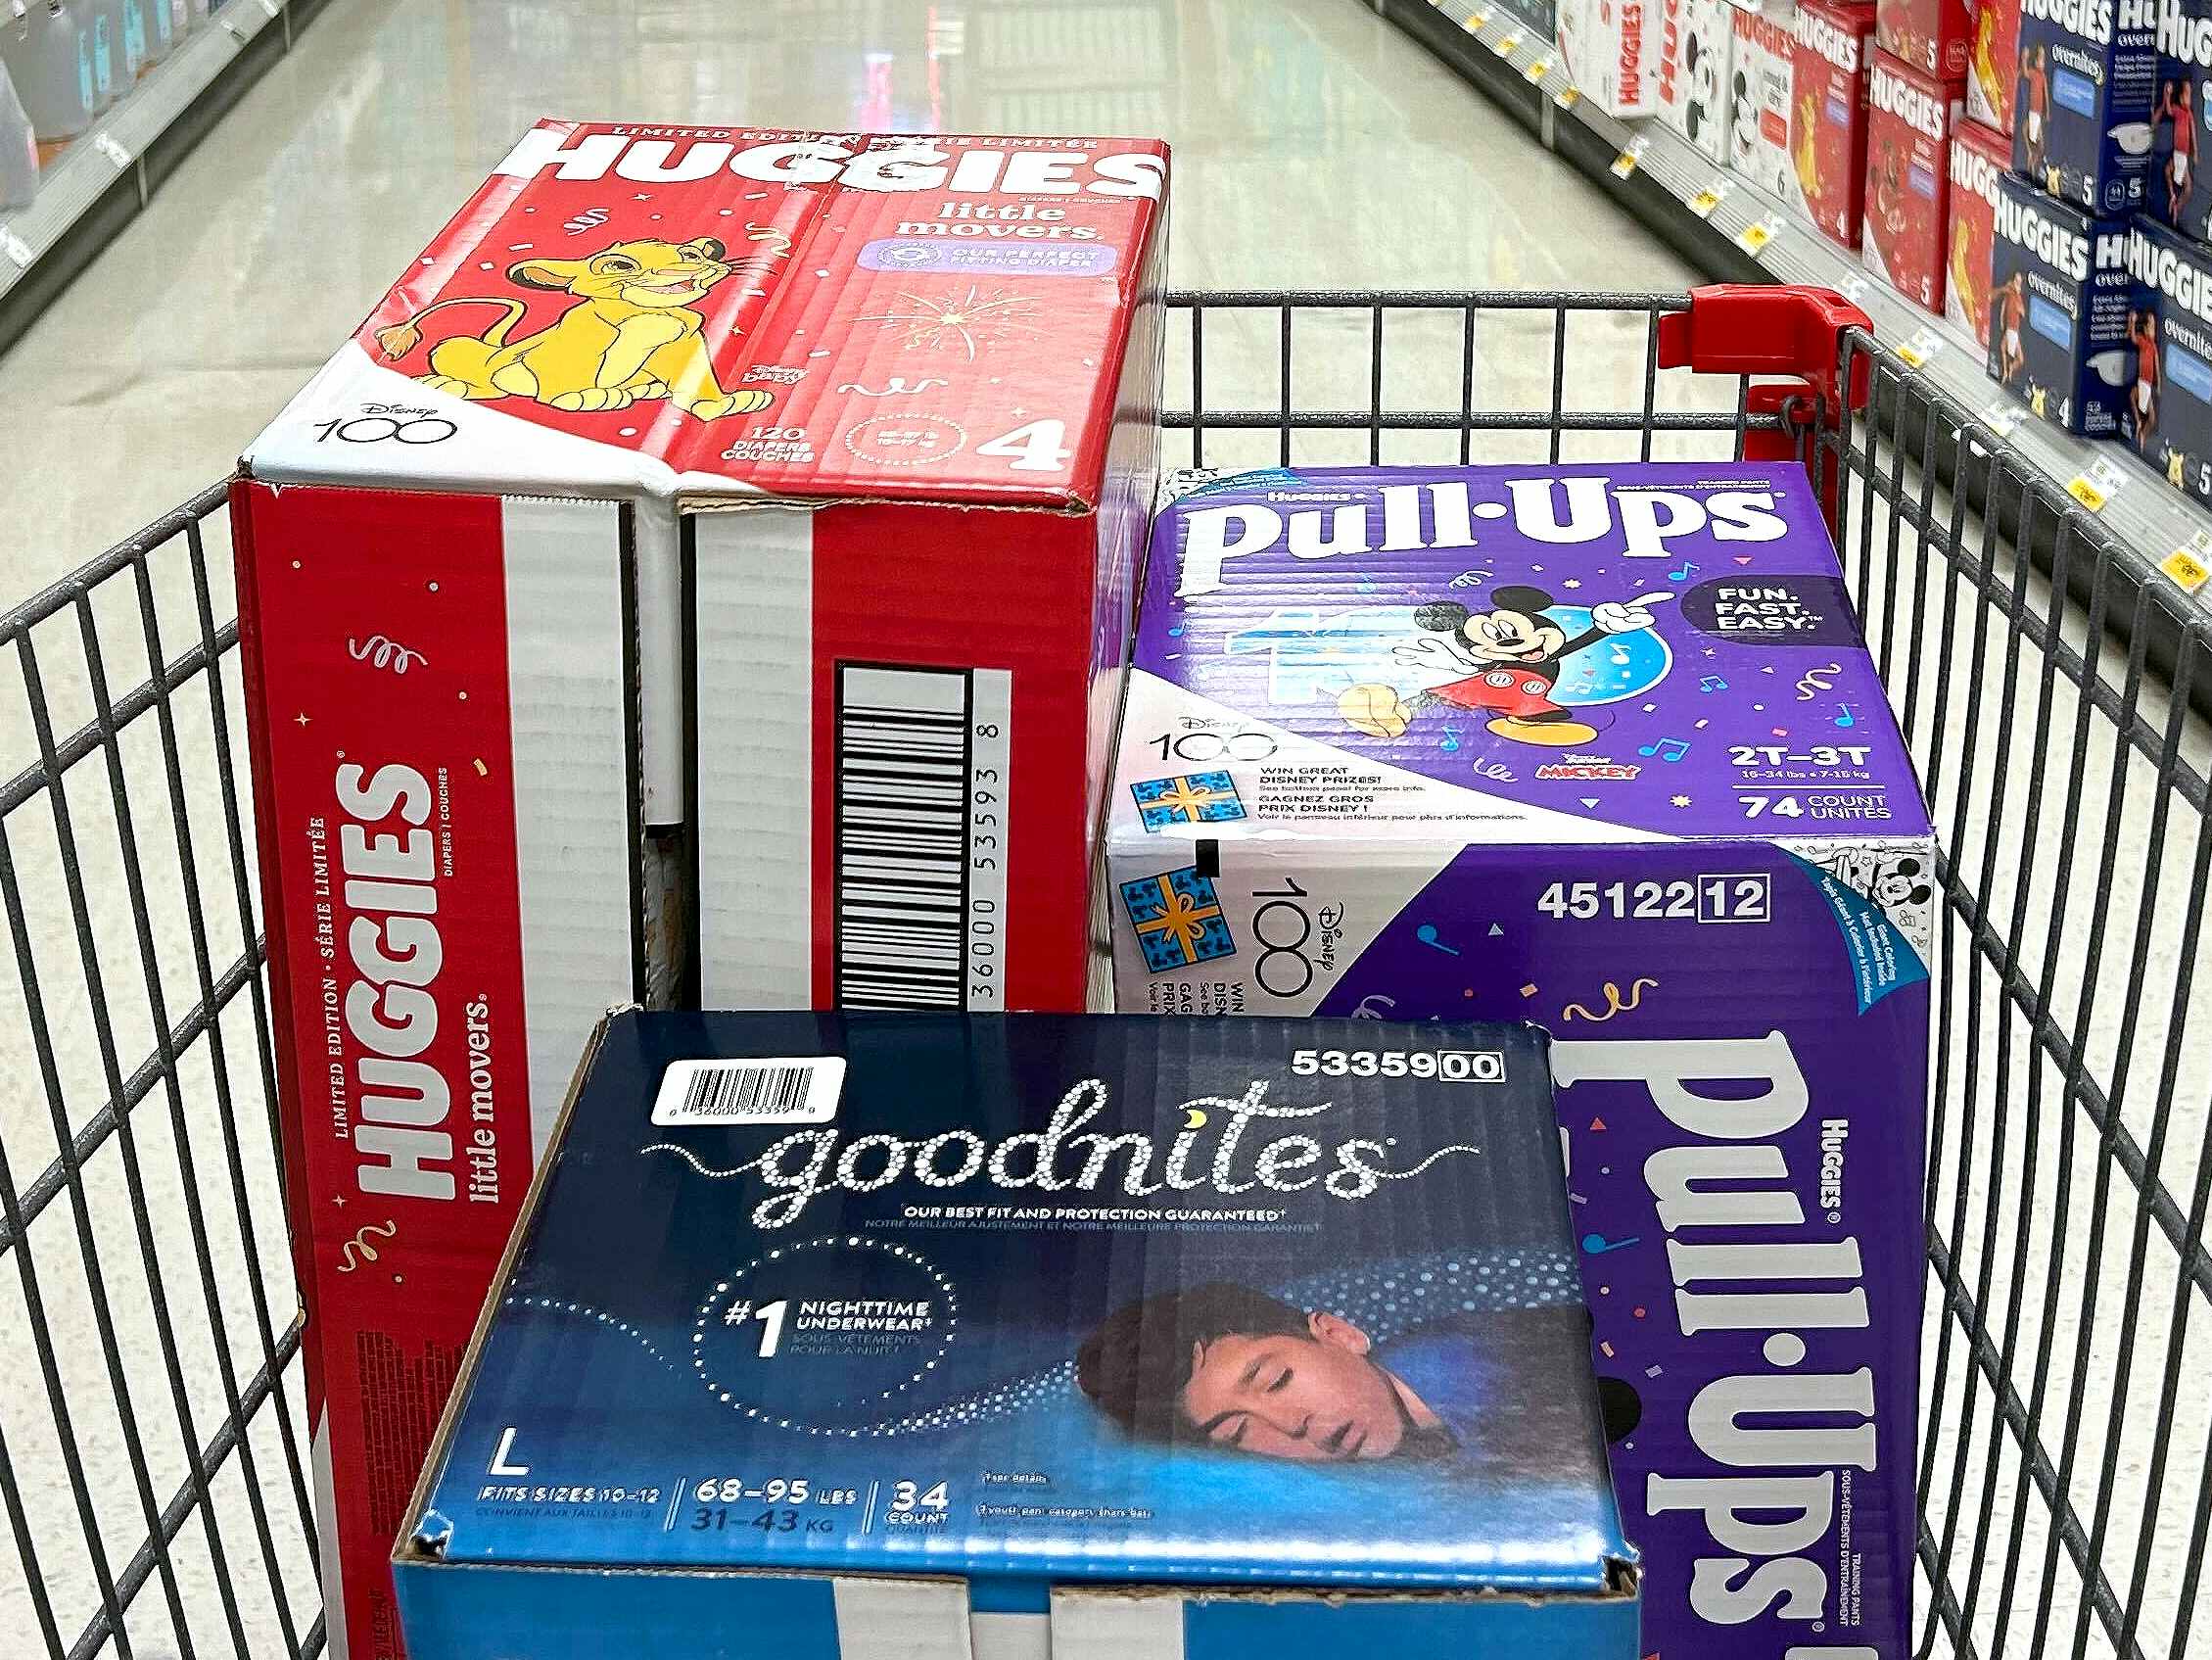 huggies, pull-ups, and goodnights diapers in shoprite shopping cart